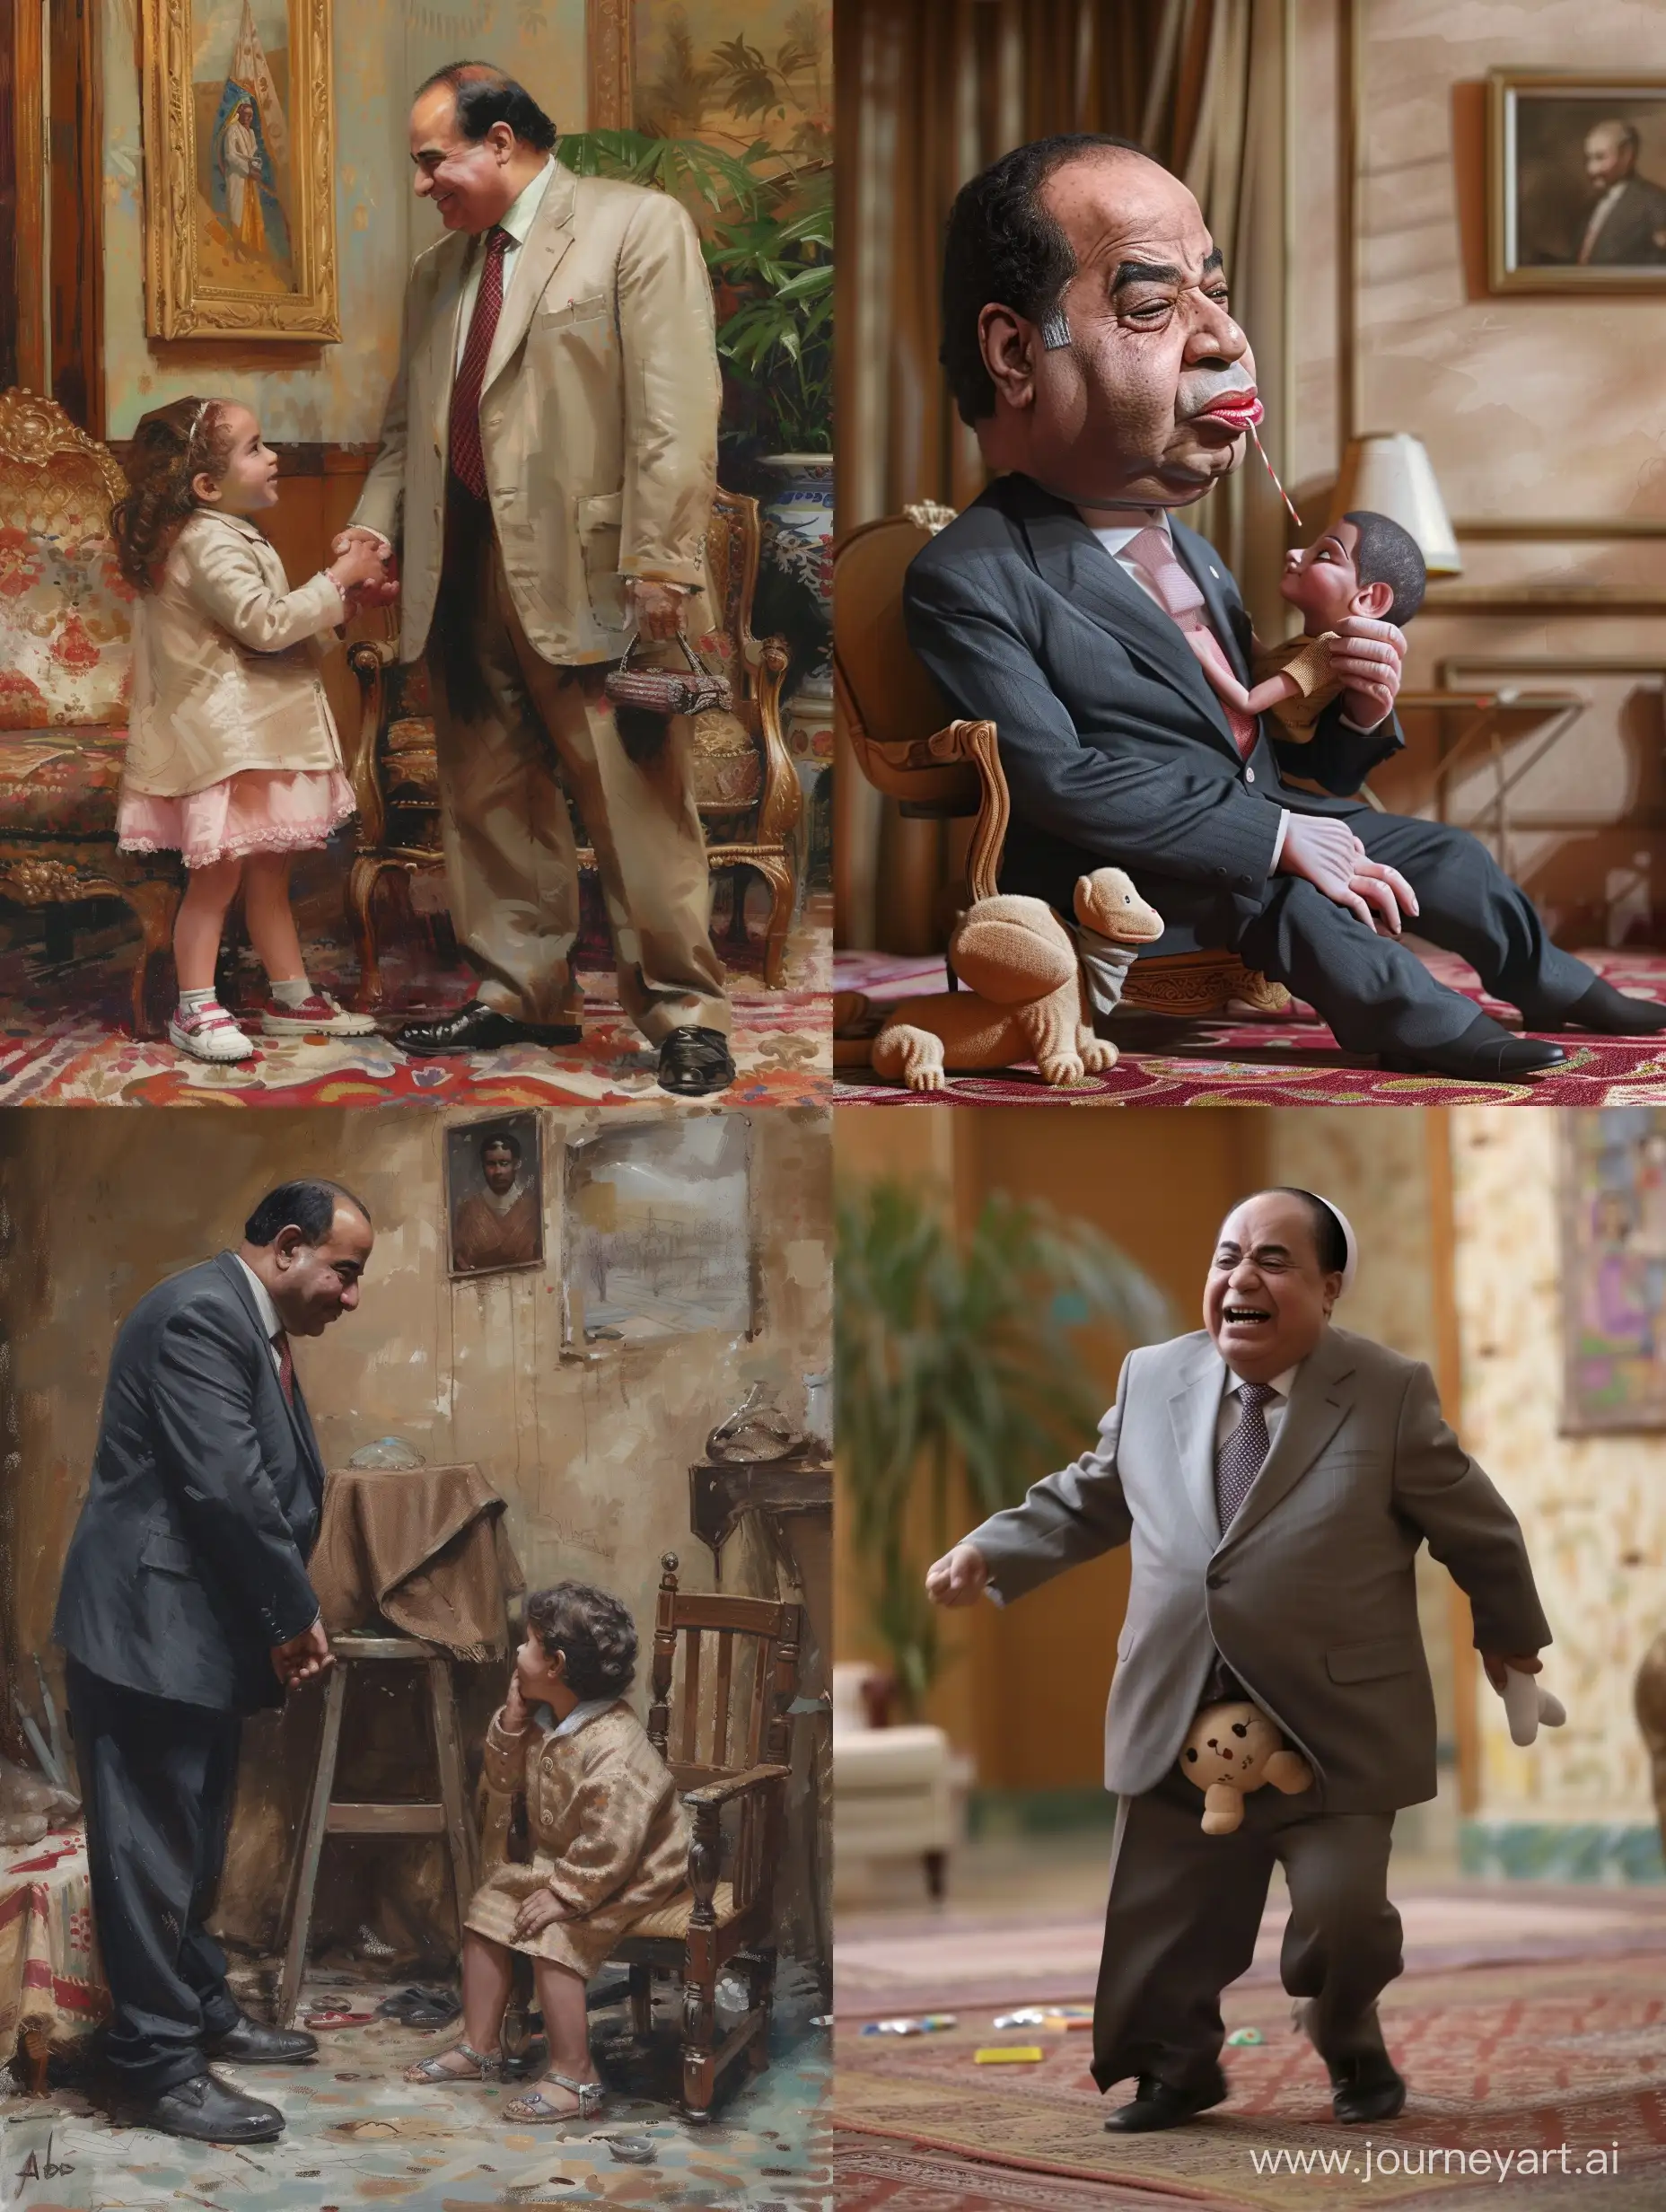 Abdel fattah el sisi being childish and doing children things realistic